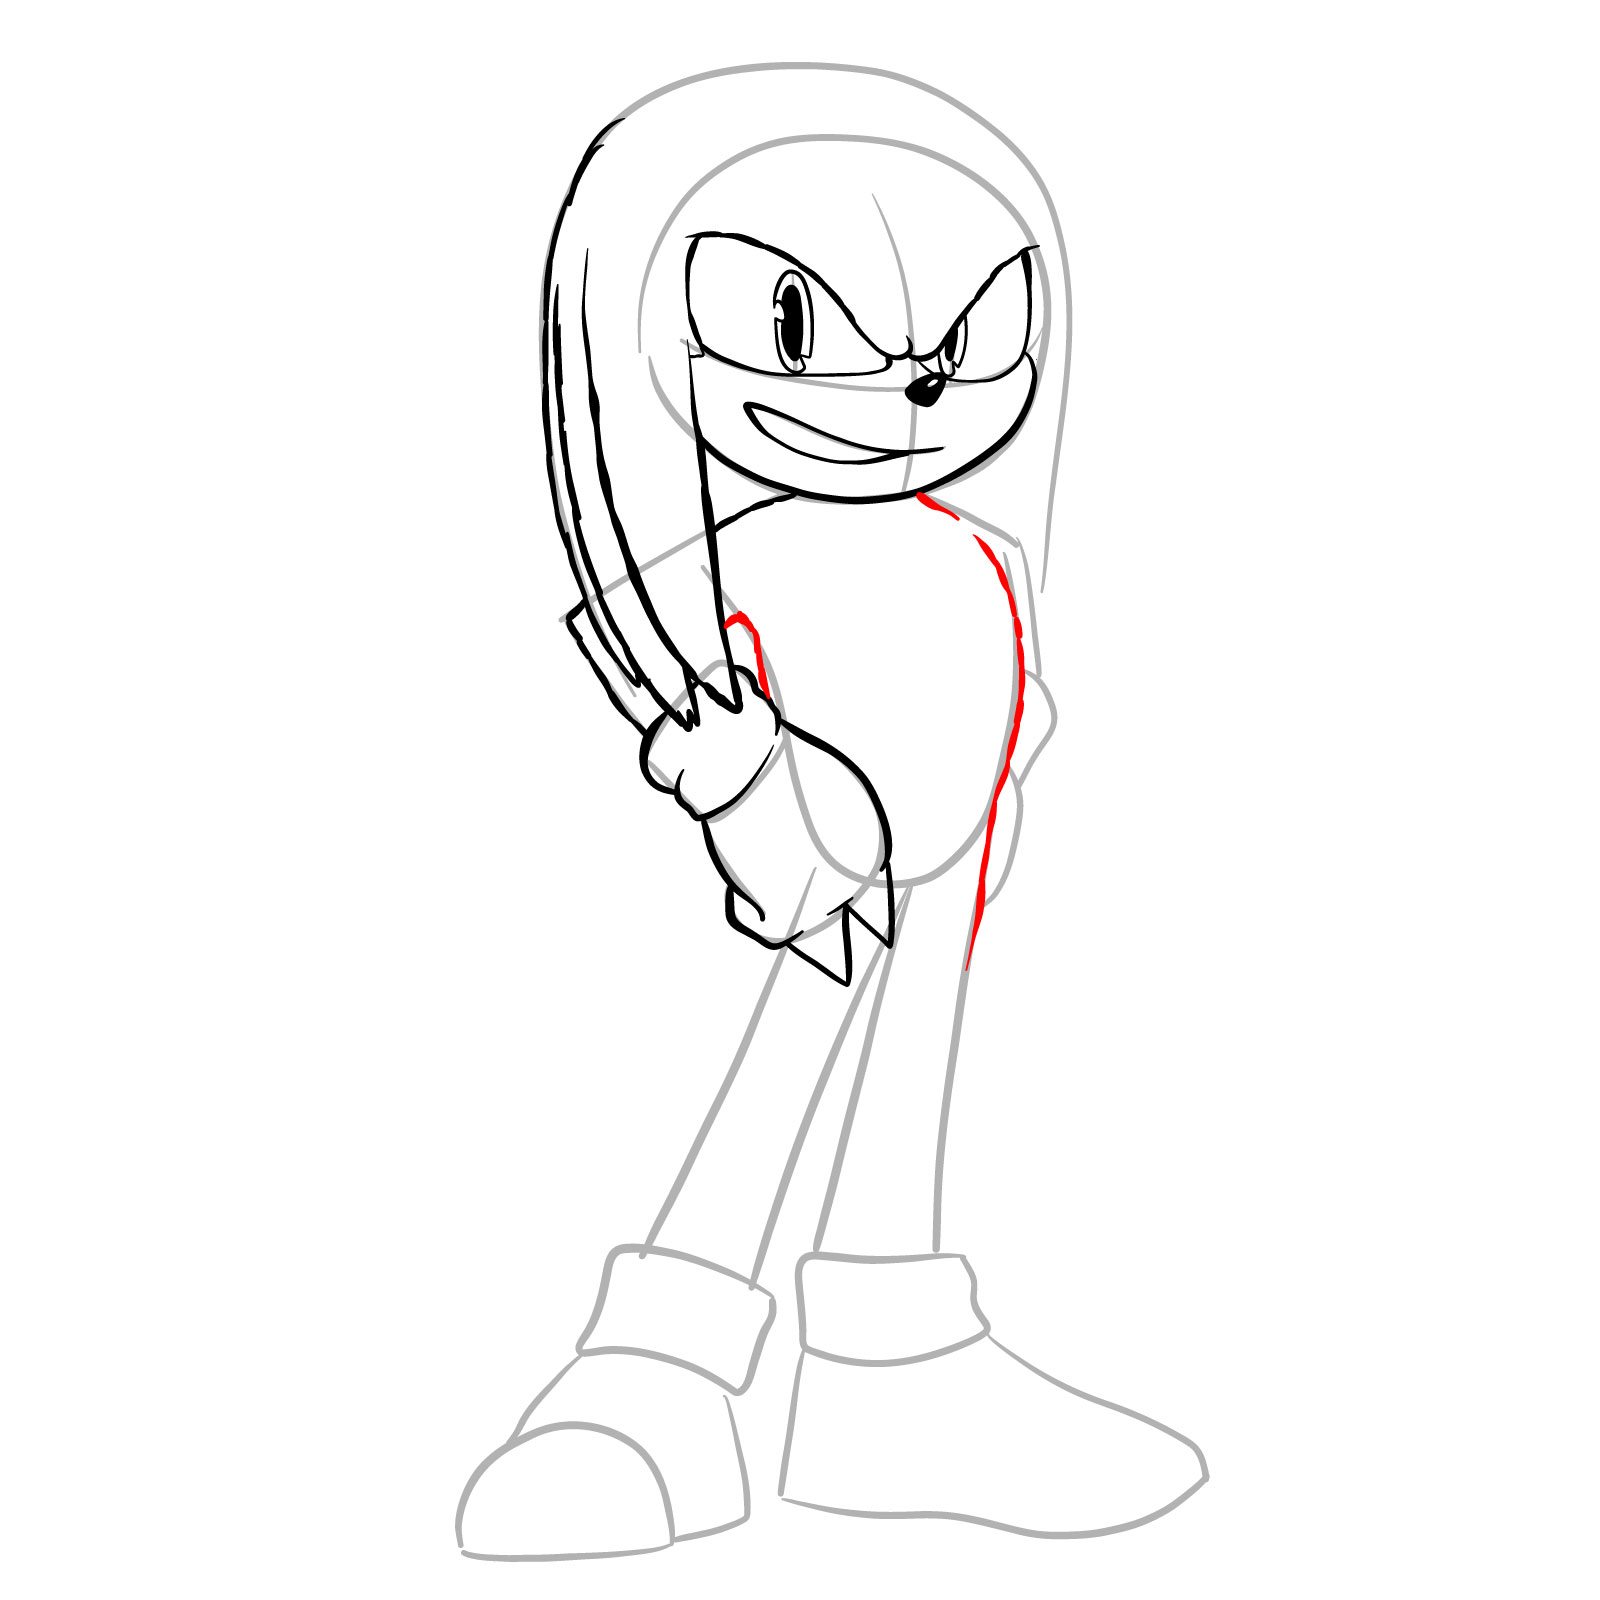 How to draw Knuckles from the movie - step 15